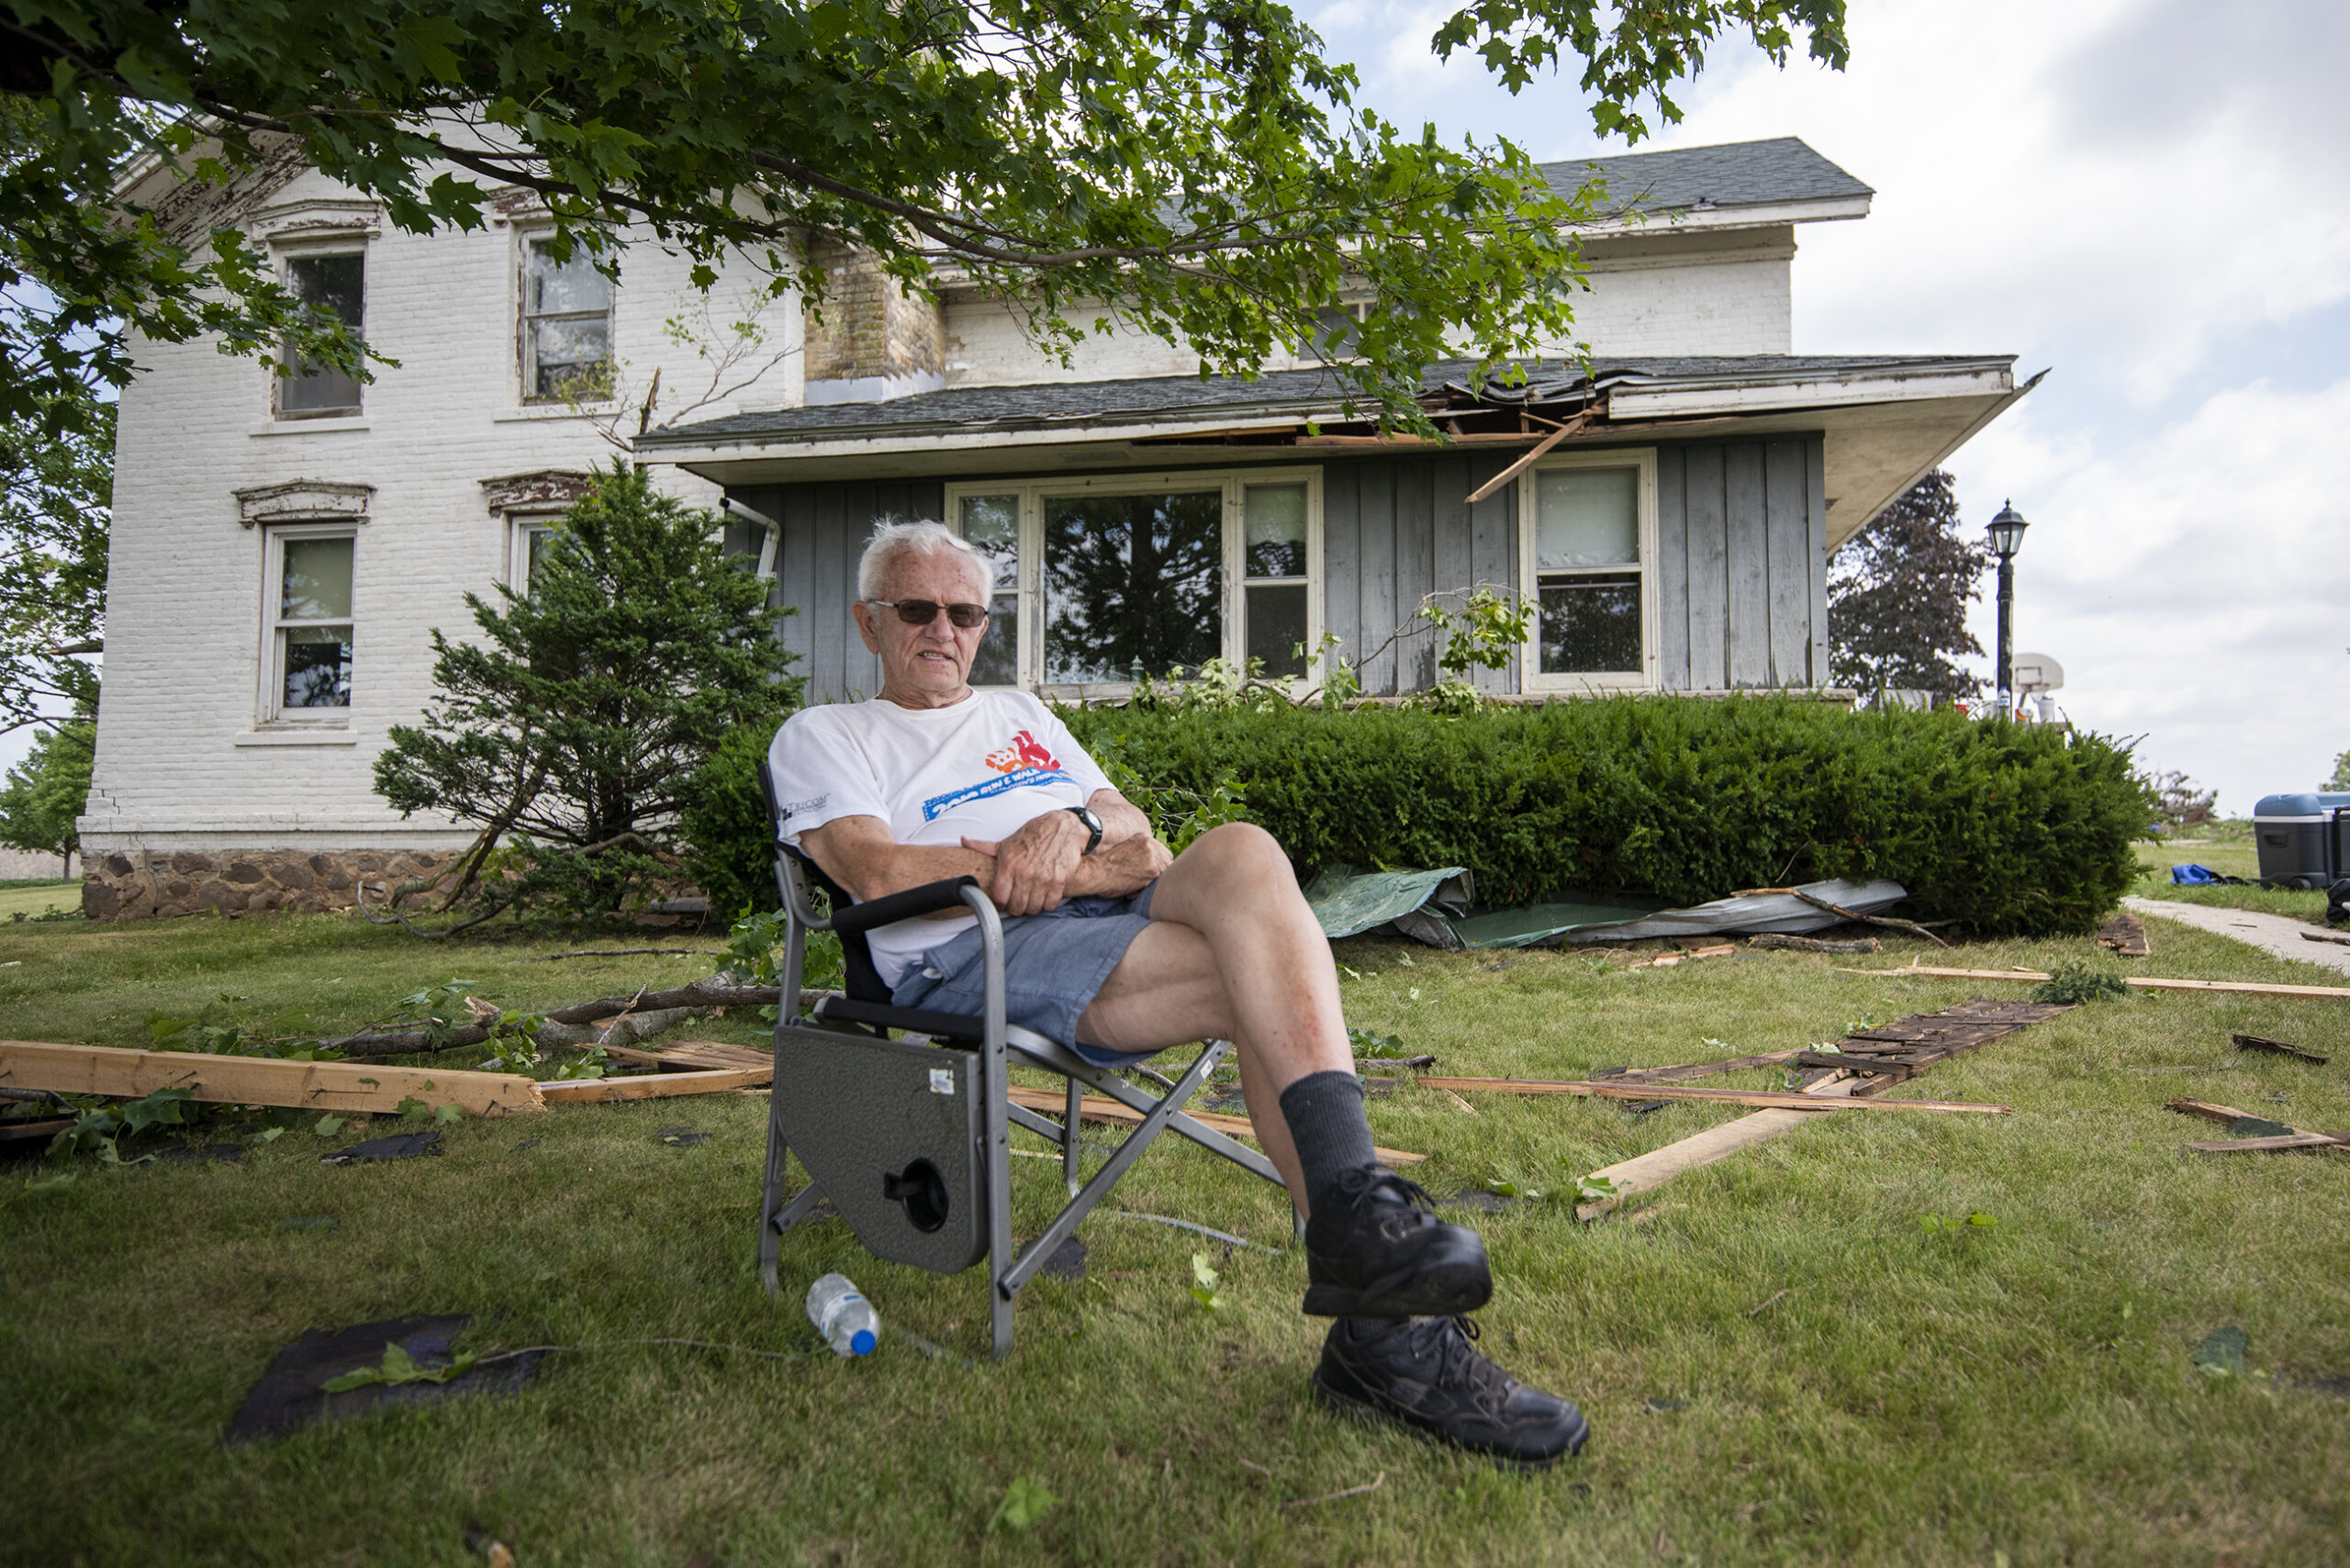 A man in sunglasses sits in a lawn chair in front of his home.